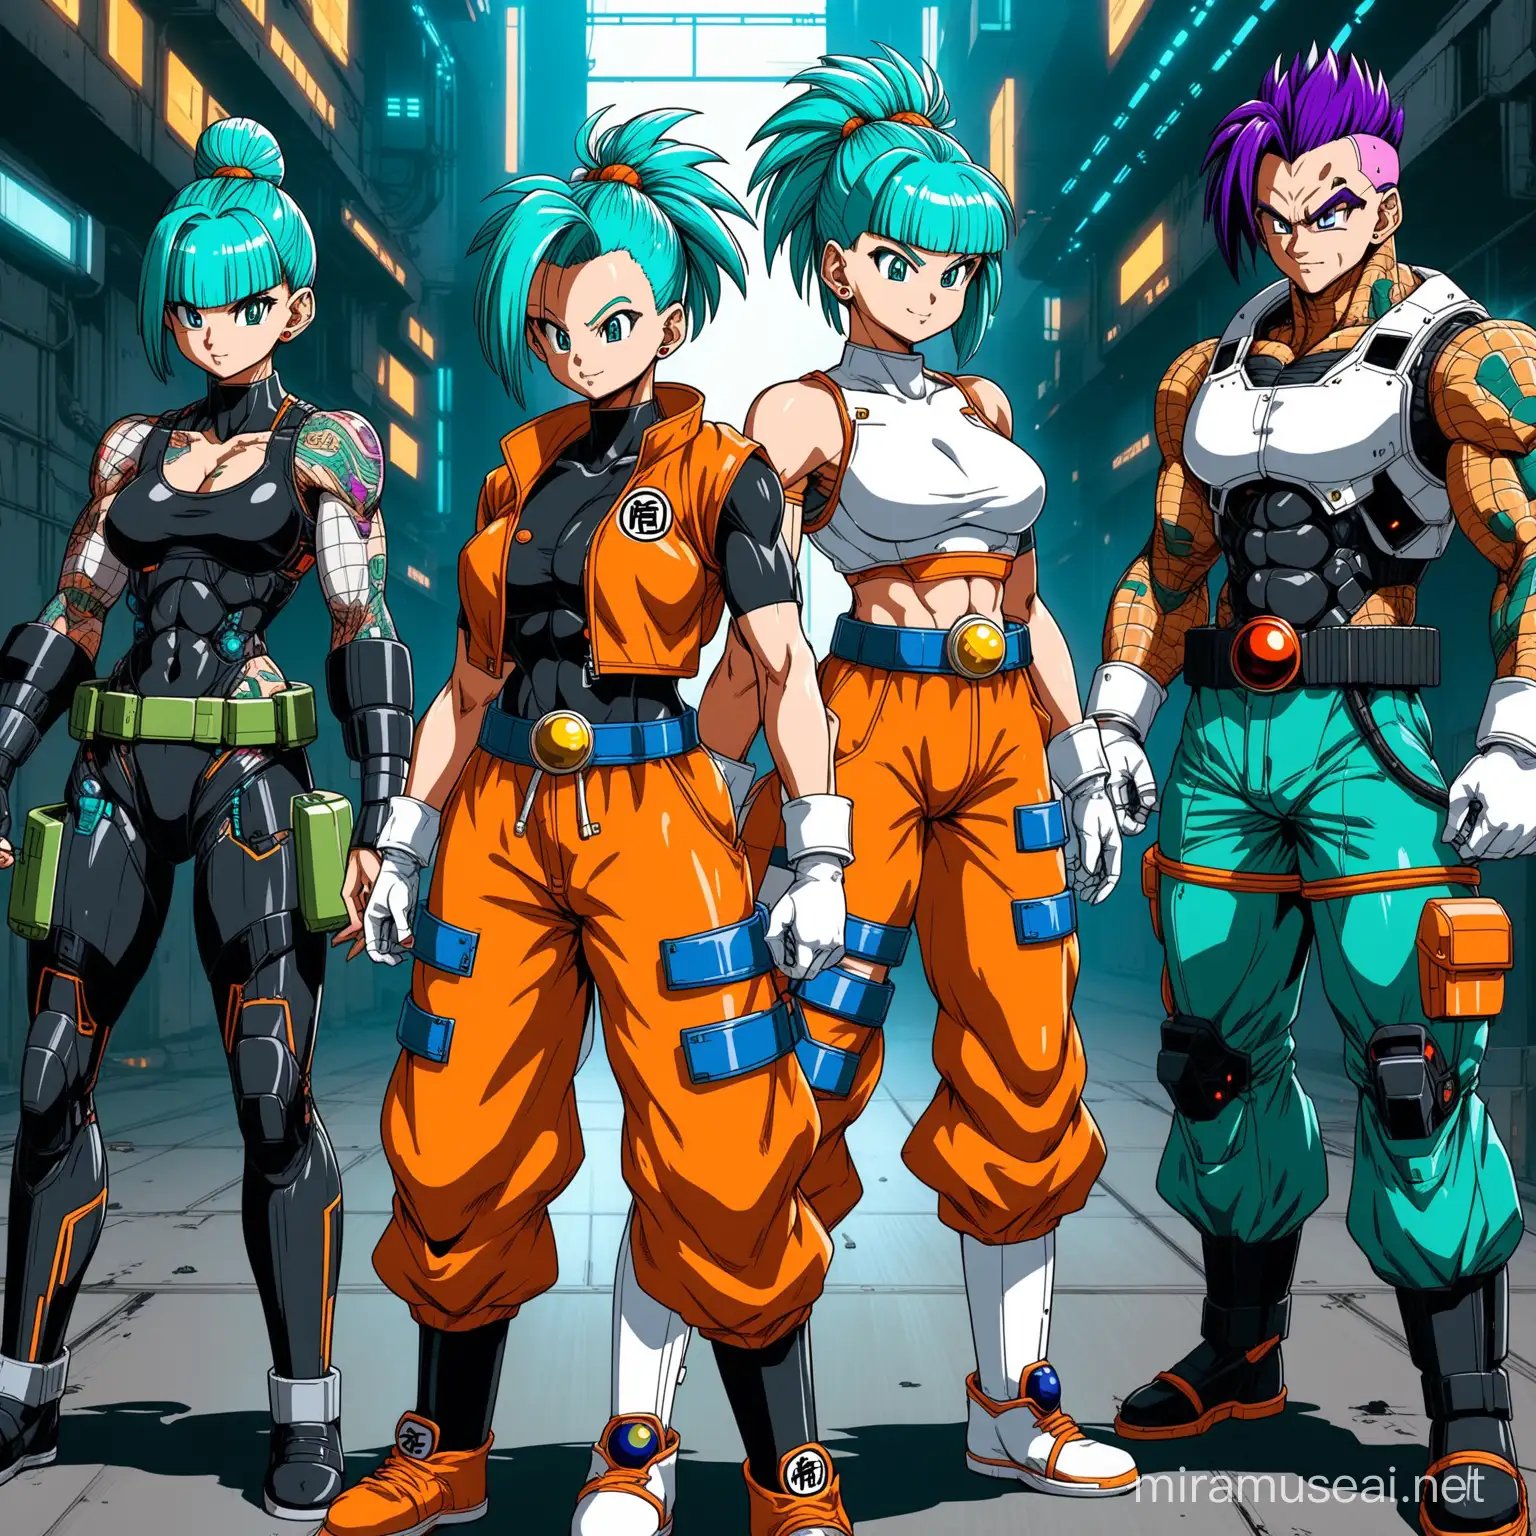 Dragon Ball Z Characters in Cyberpunk World with Cybernetic Enhancements